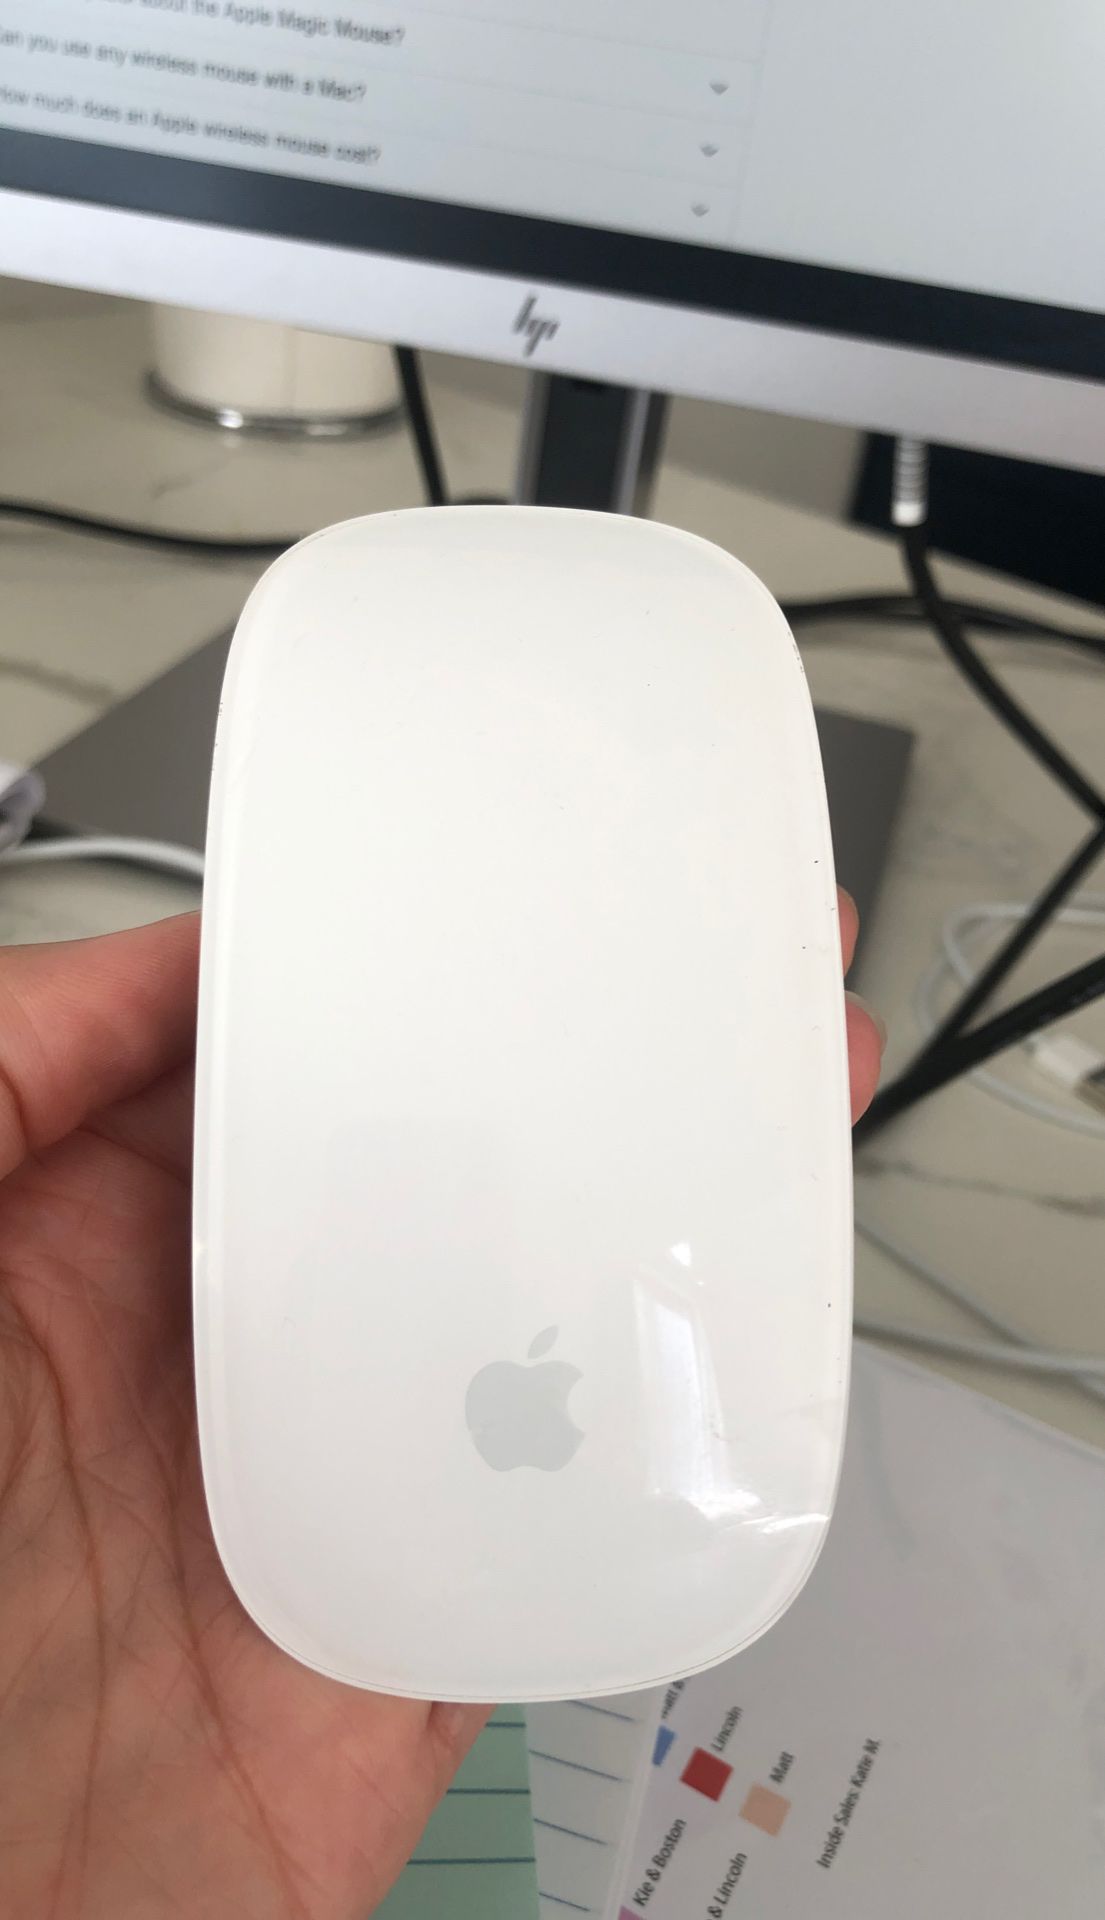 Wireless Apple mouse